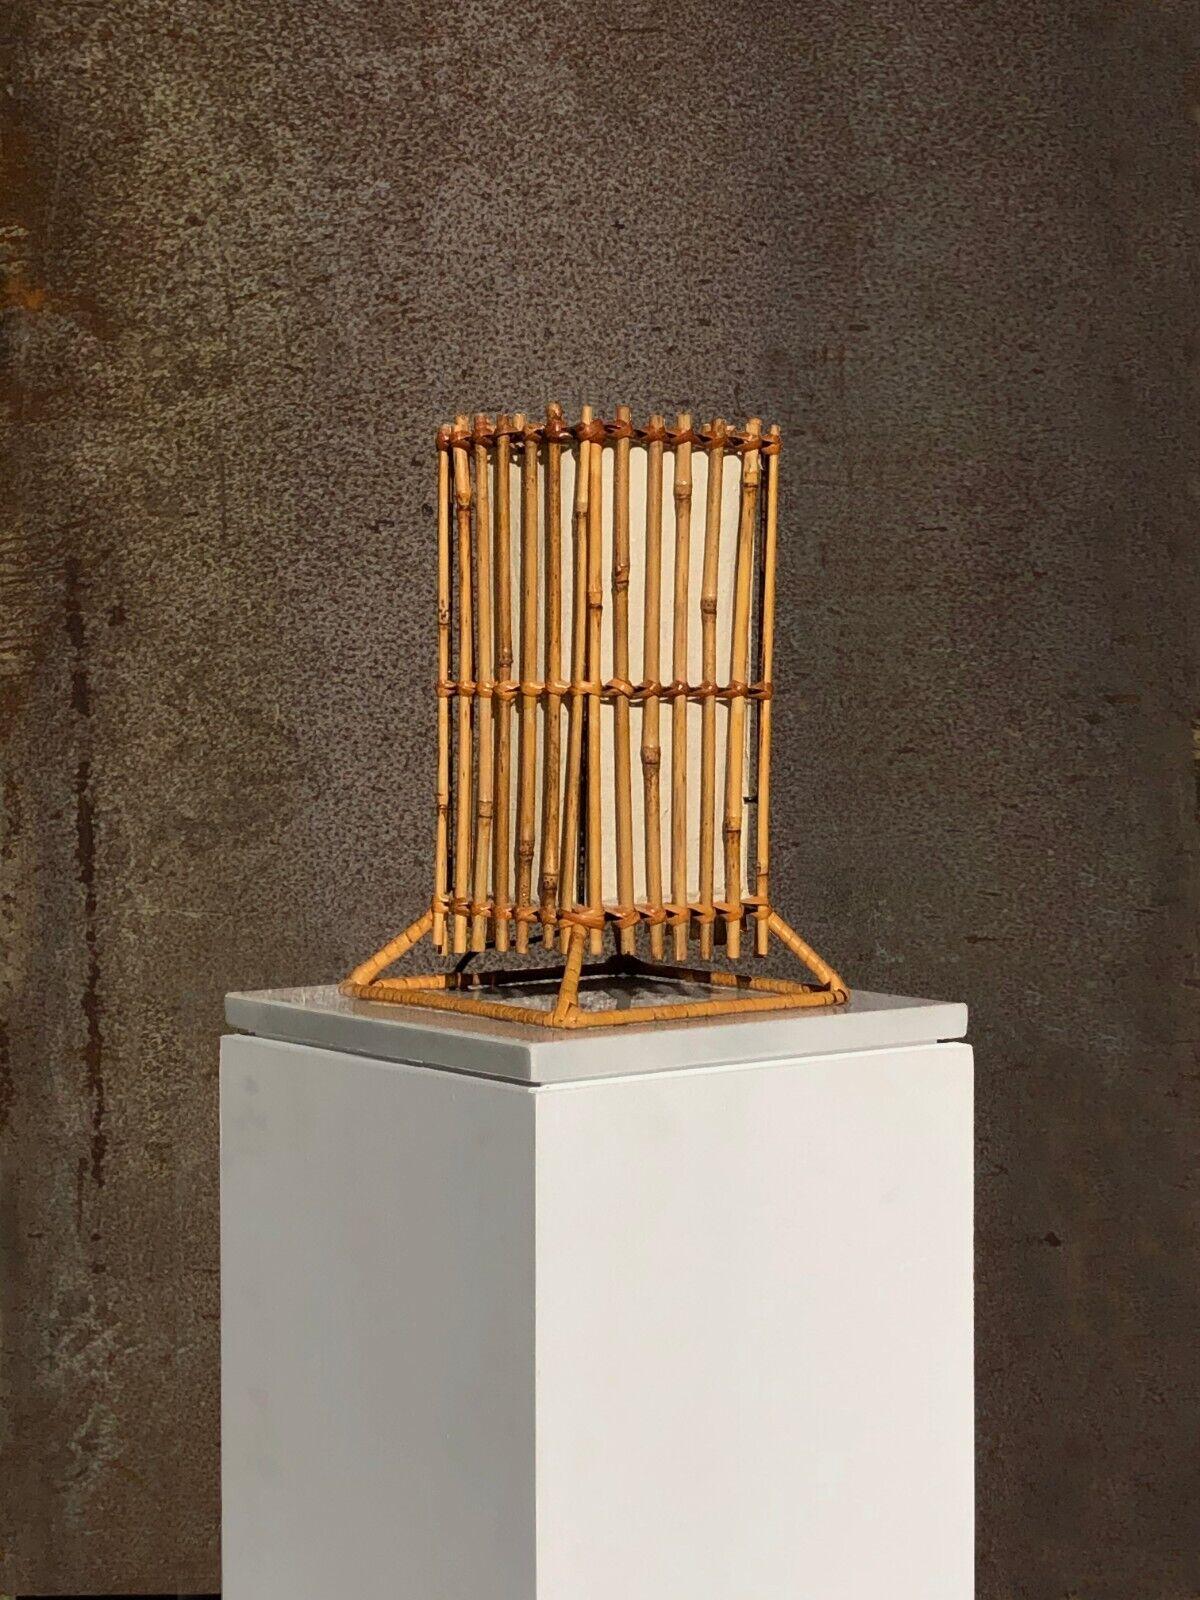 A small Architectural, Modernist, Rustic Modern, Brutalist, Fifties table lamp or night light, square base with a pyramidal structure, topped by a cubic lampshade made of vertical bamboo rods woven on a square structure, itself around a very fine